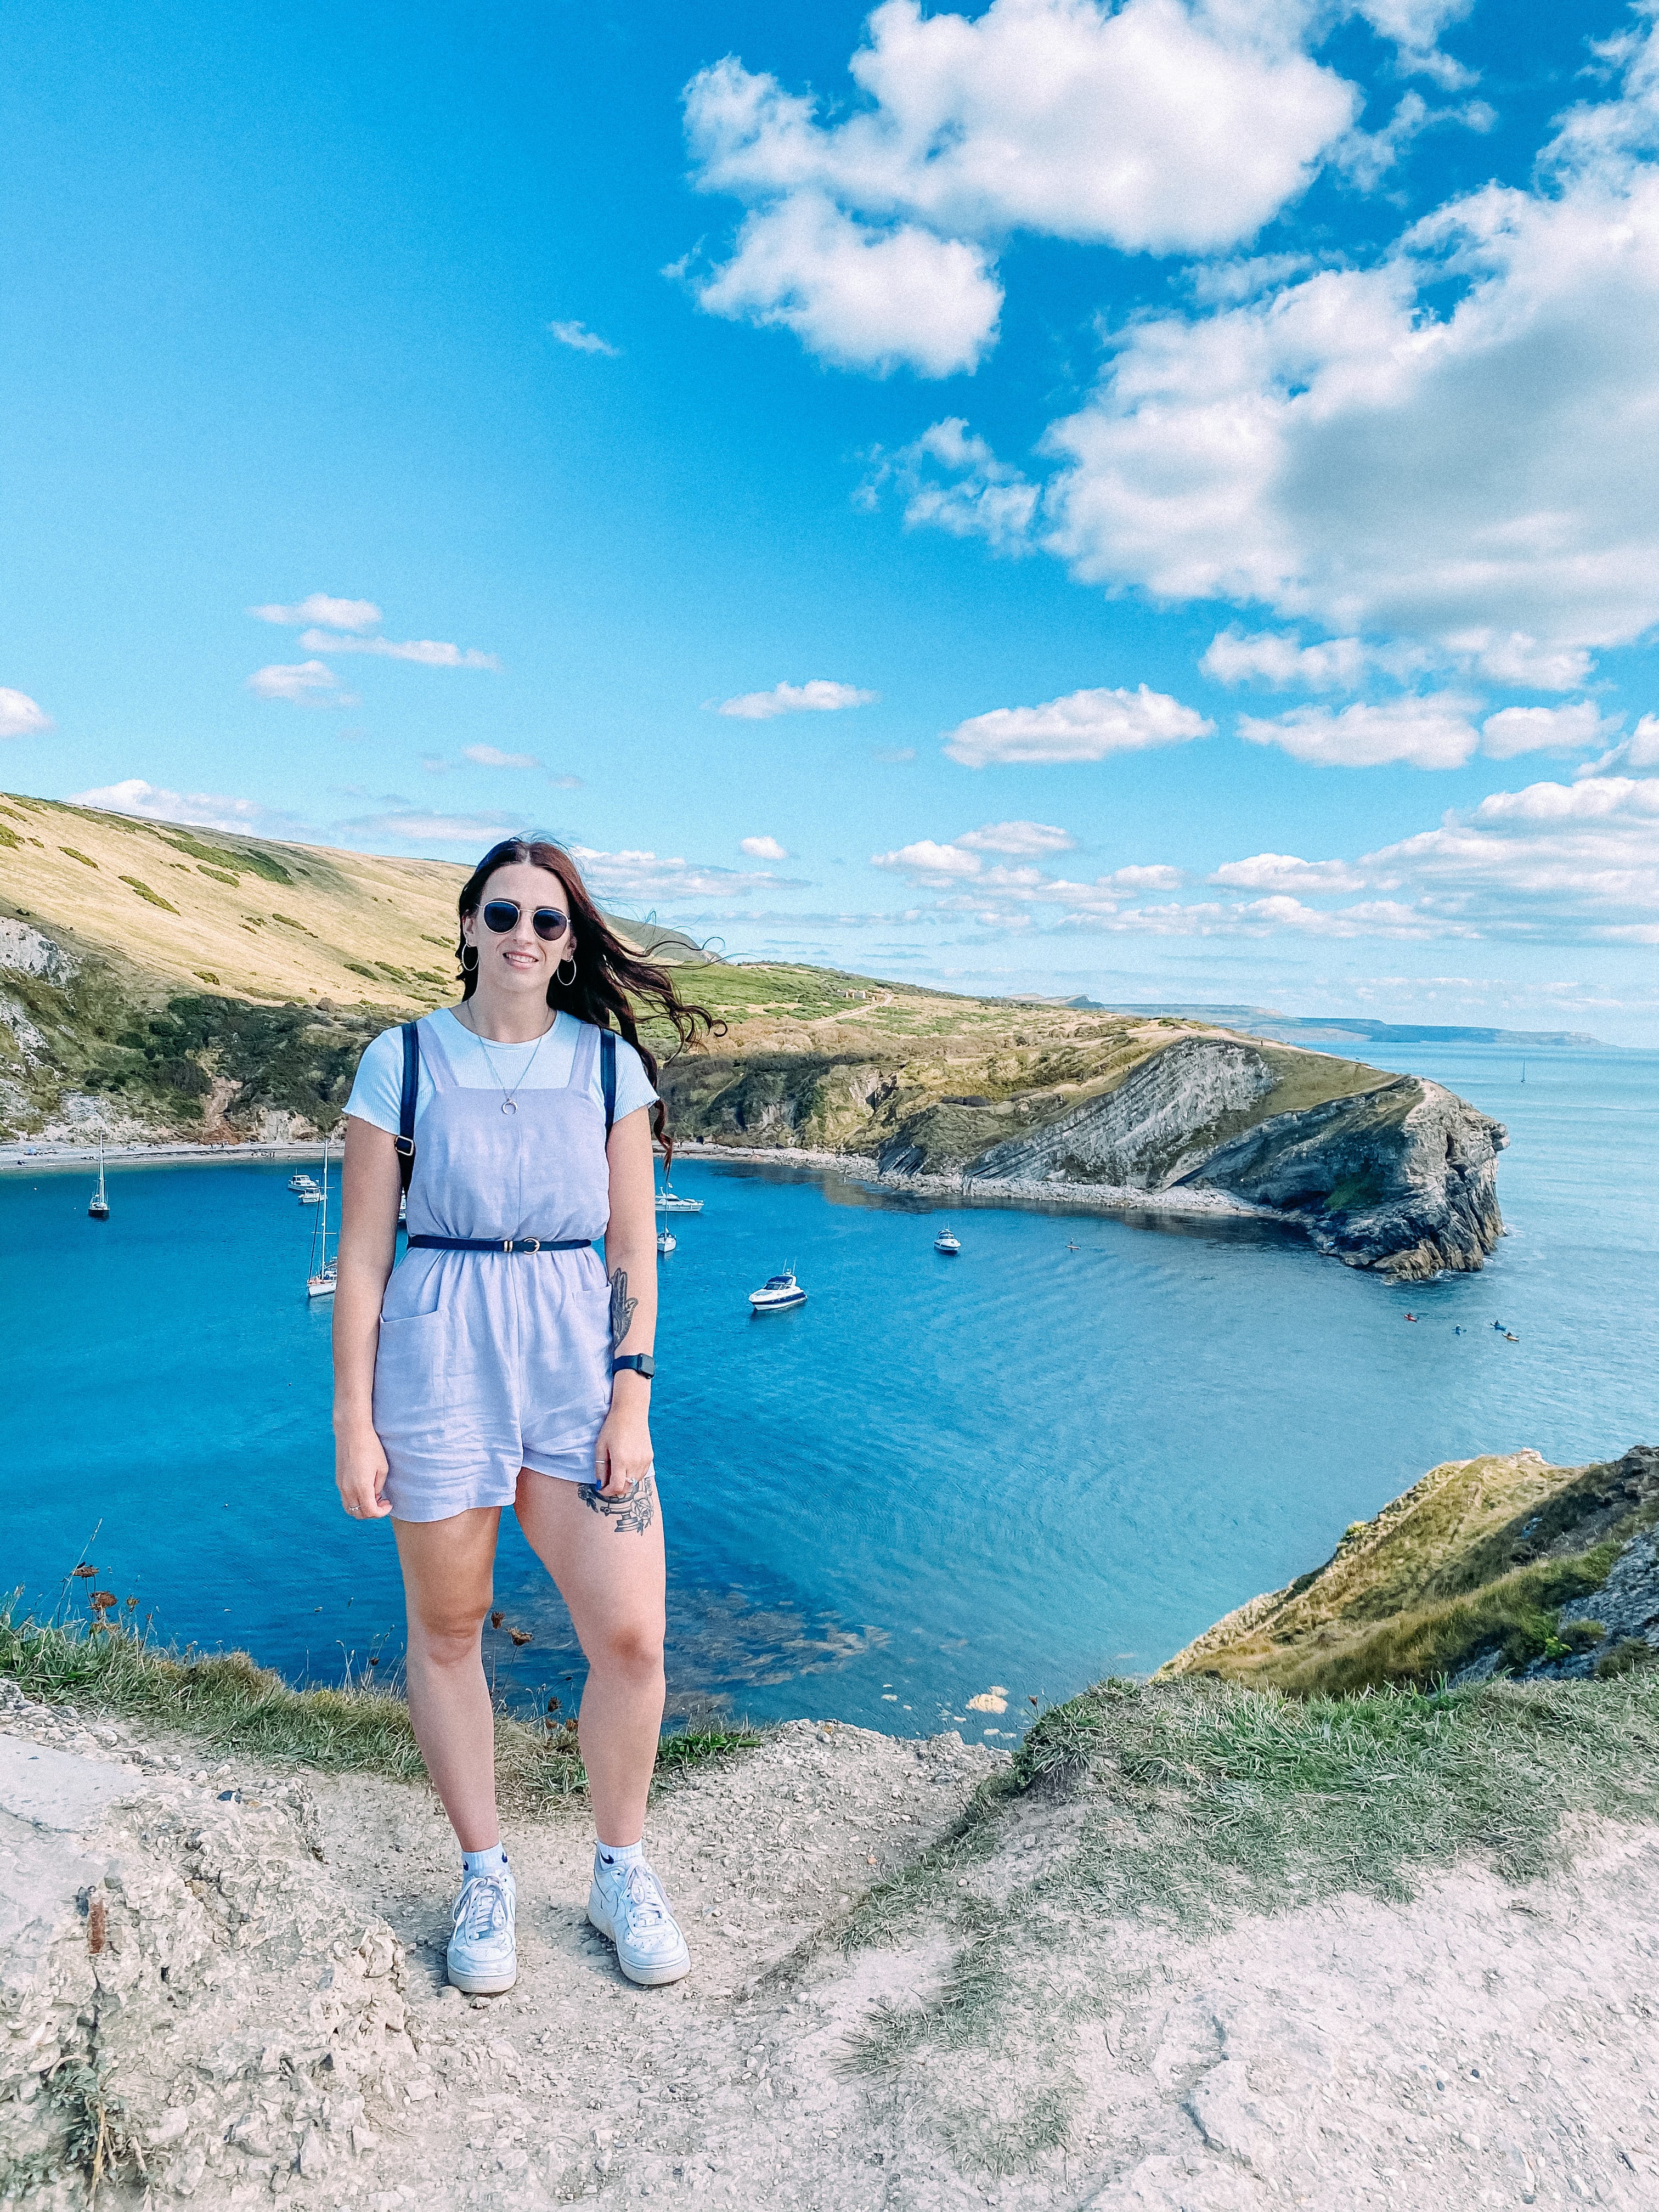 Lulworth cove, dorset in the summer with blue skies